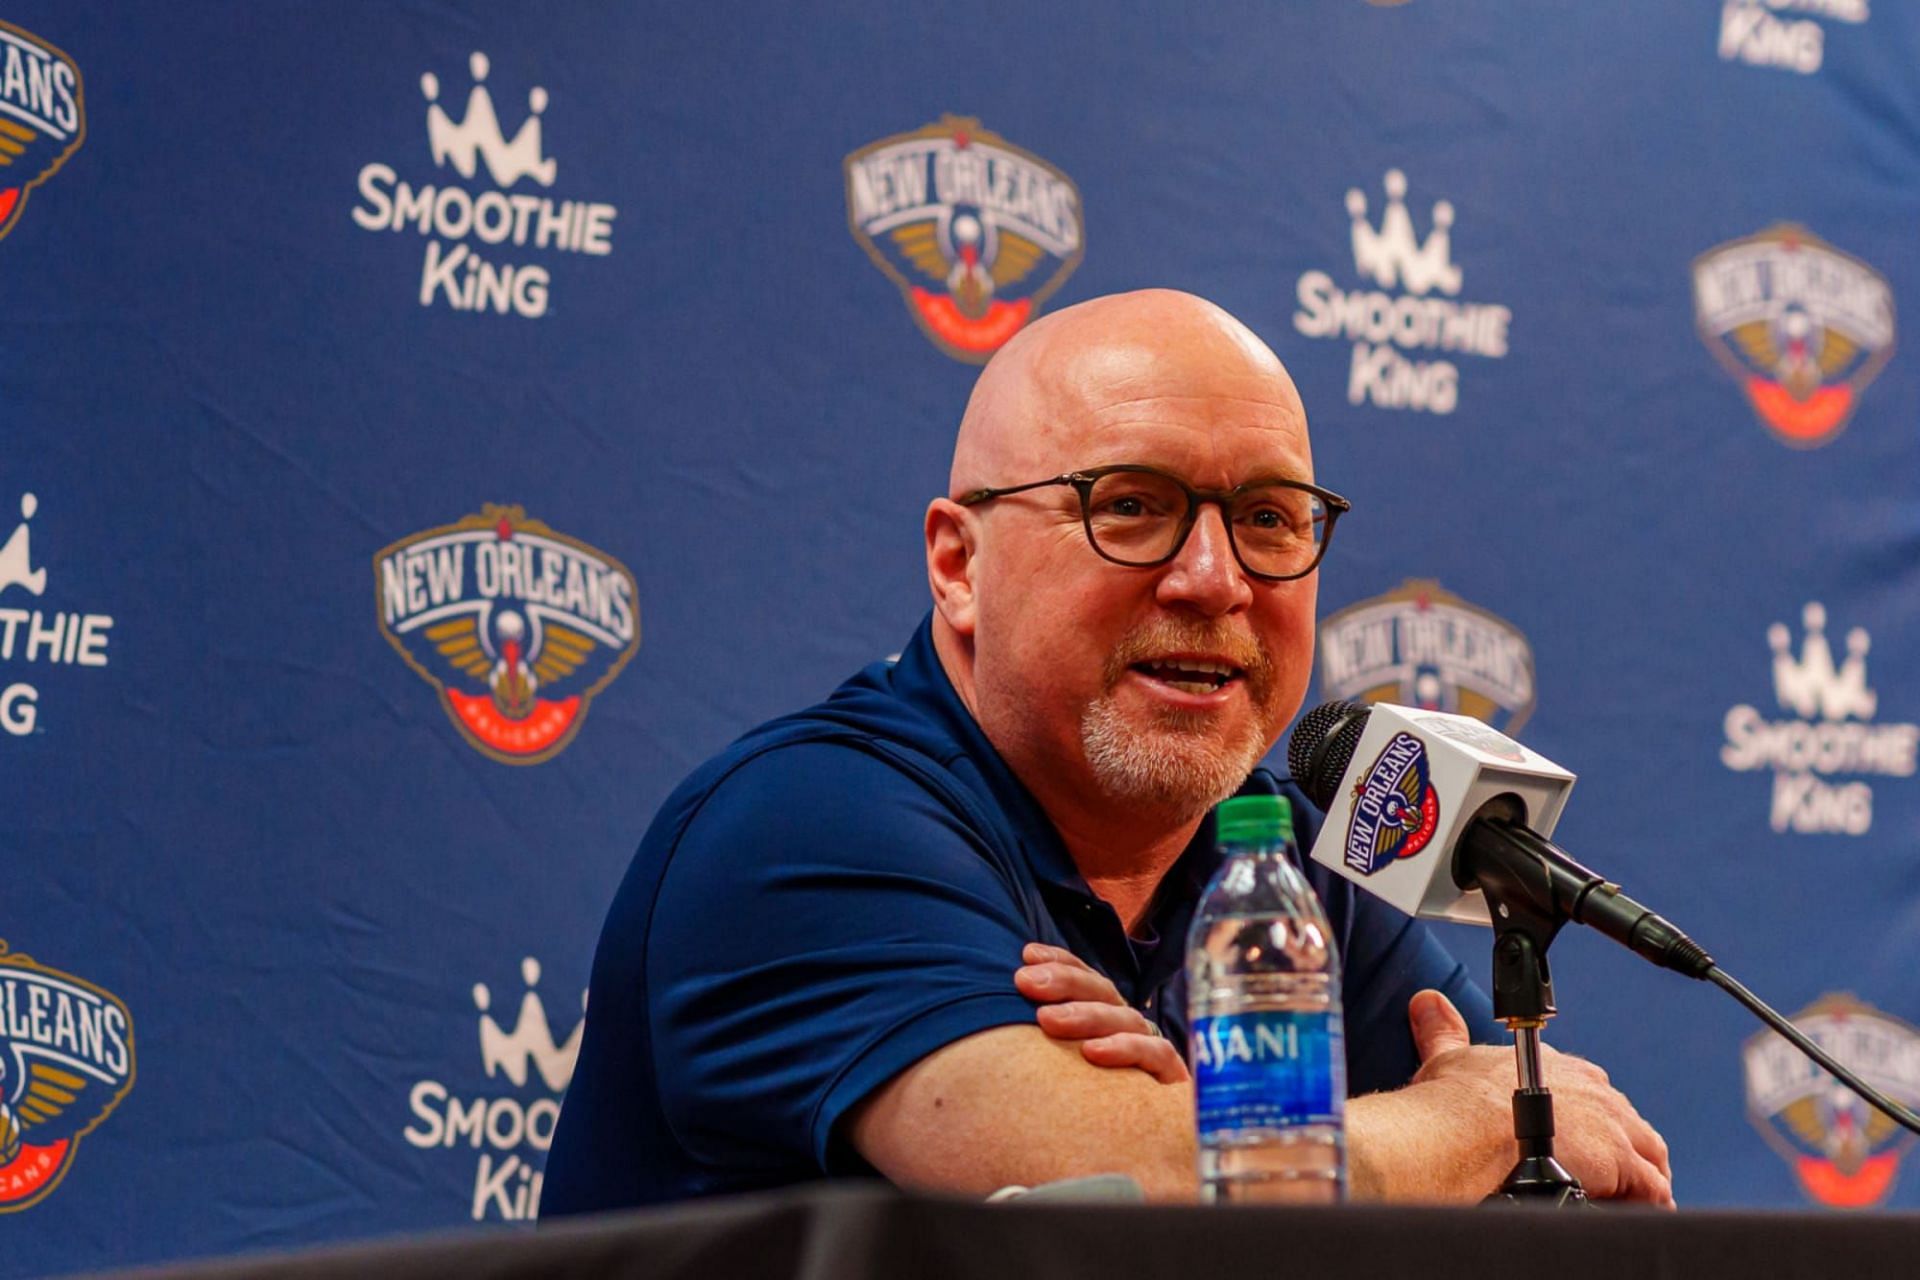 New Orleans Pelicans vice president of basketball operations David Griffin